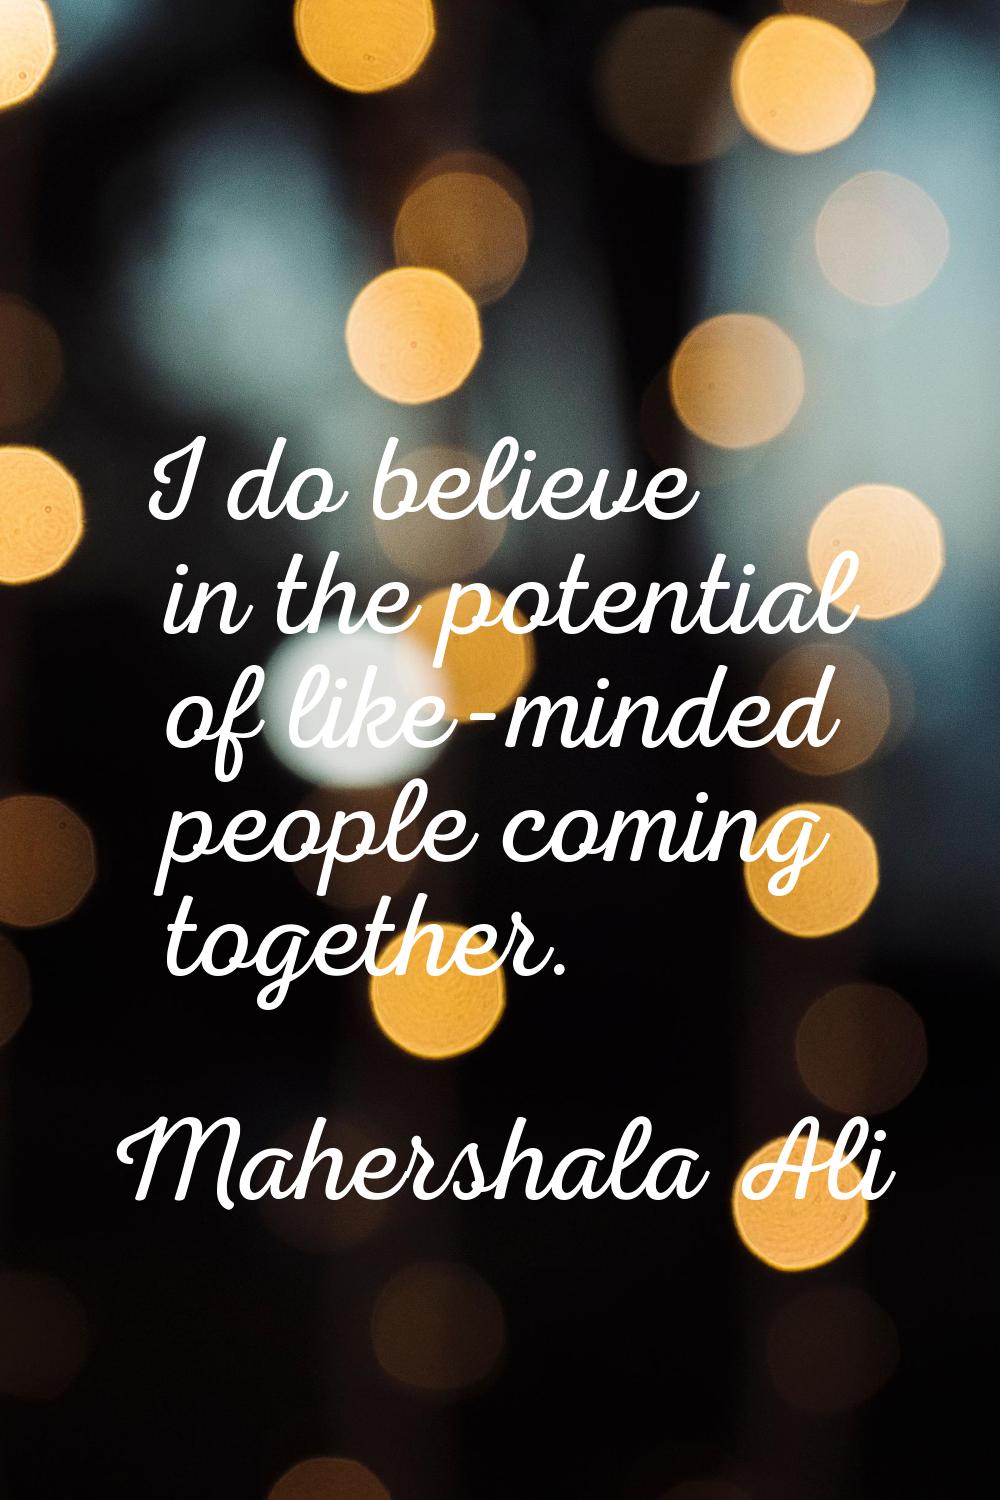 I do believe in the potential of like-minded people coming together.